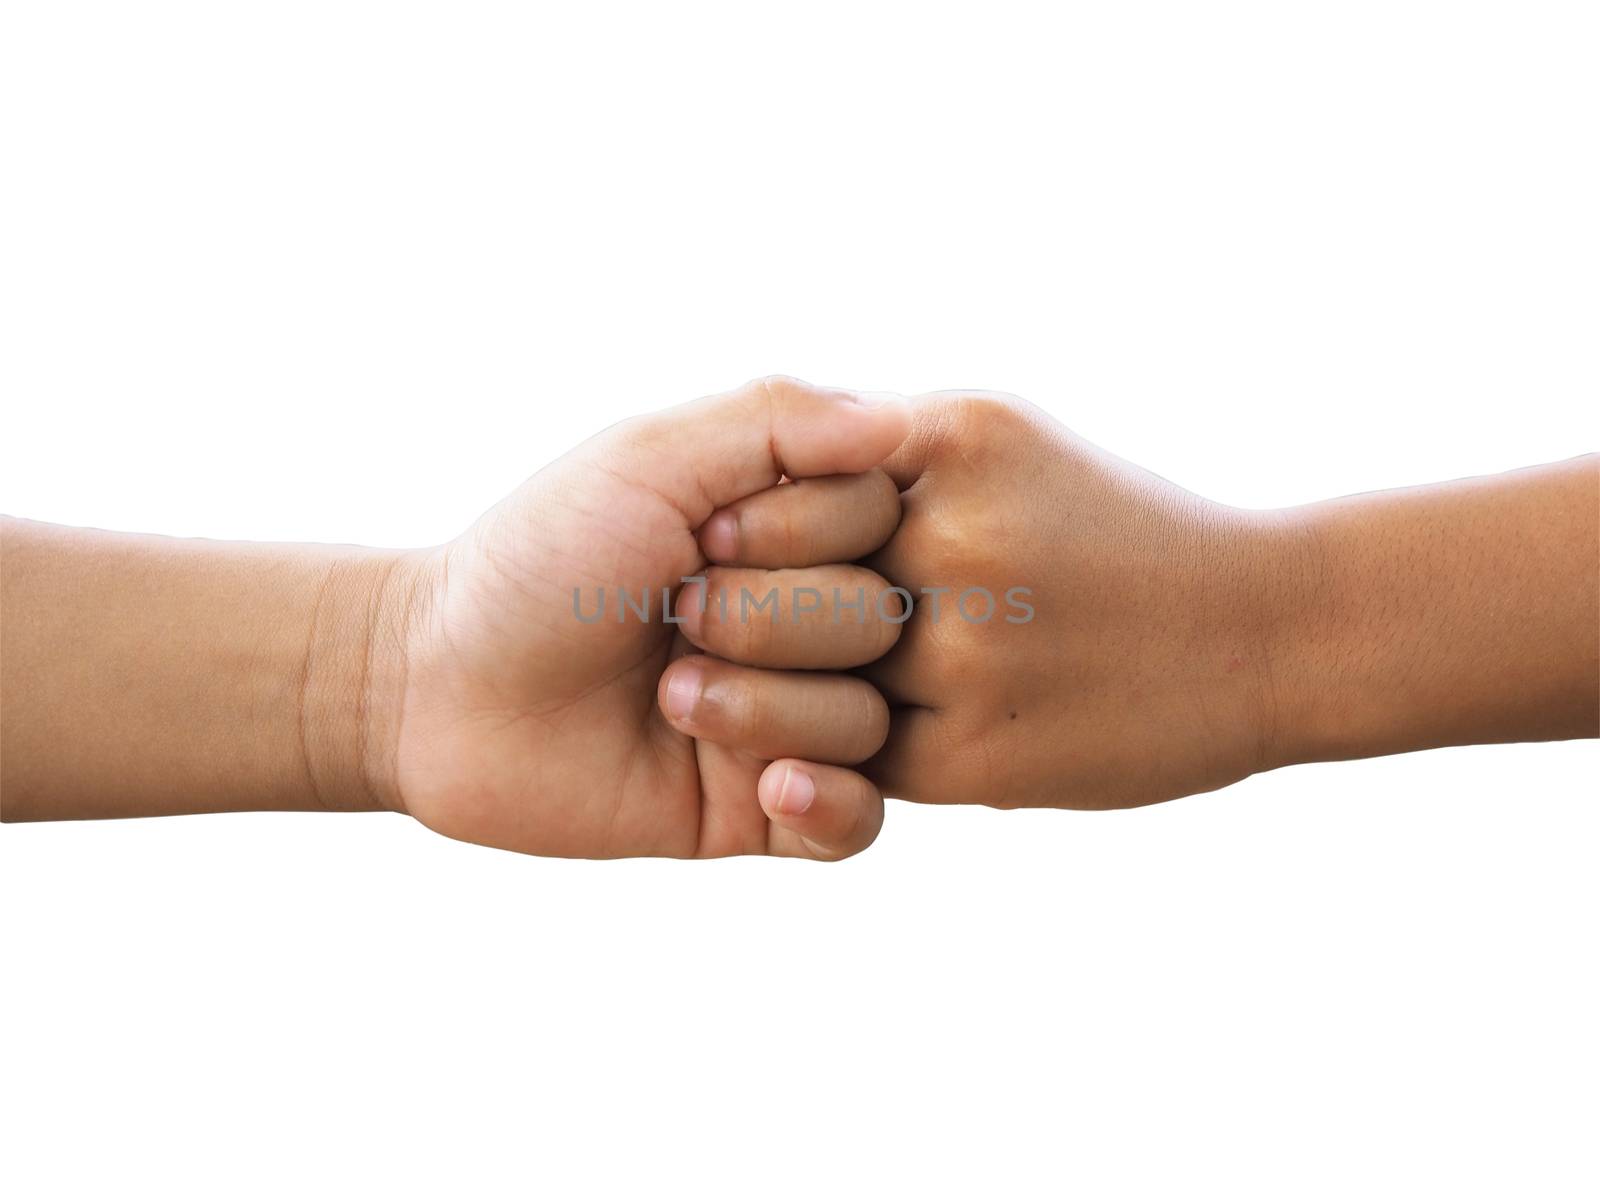 Boy  fist bumping On a white background.
It is a new greeting during the Covid virus epidemic prevention. clipping path.
new normal concept.